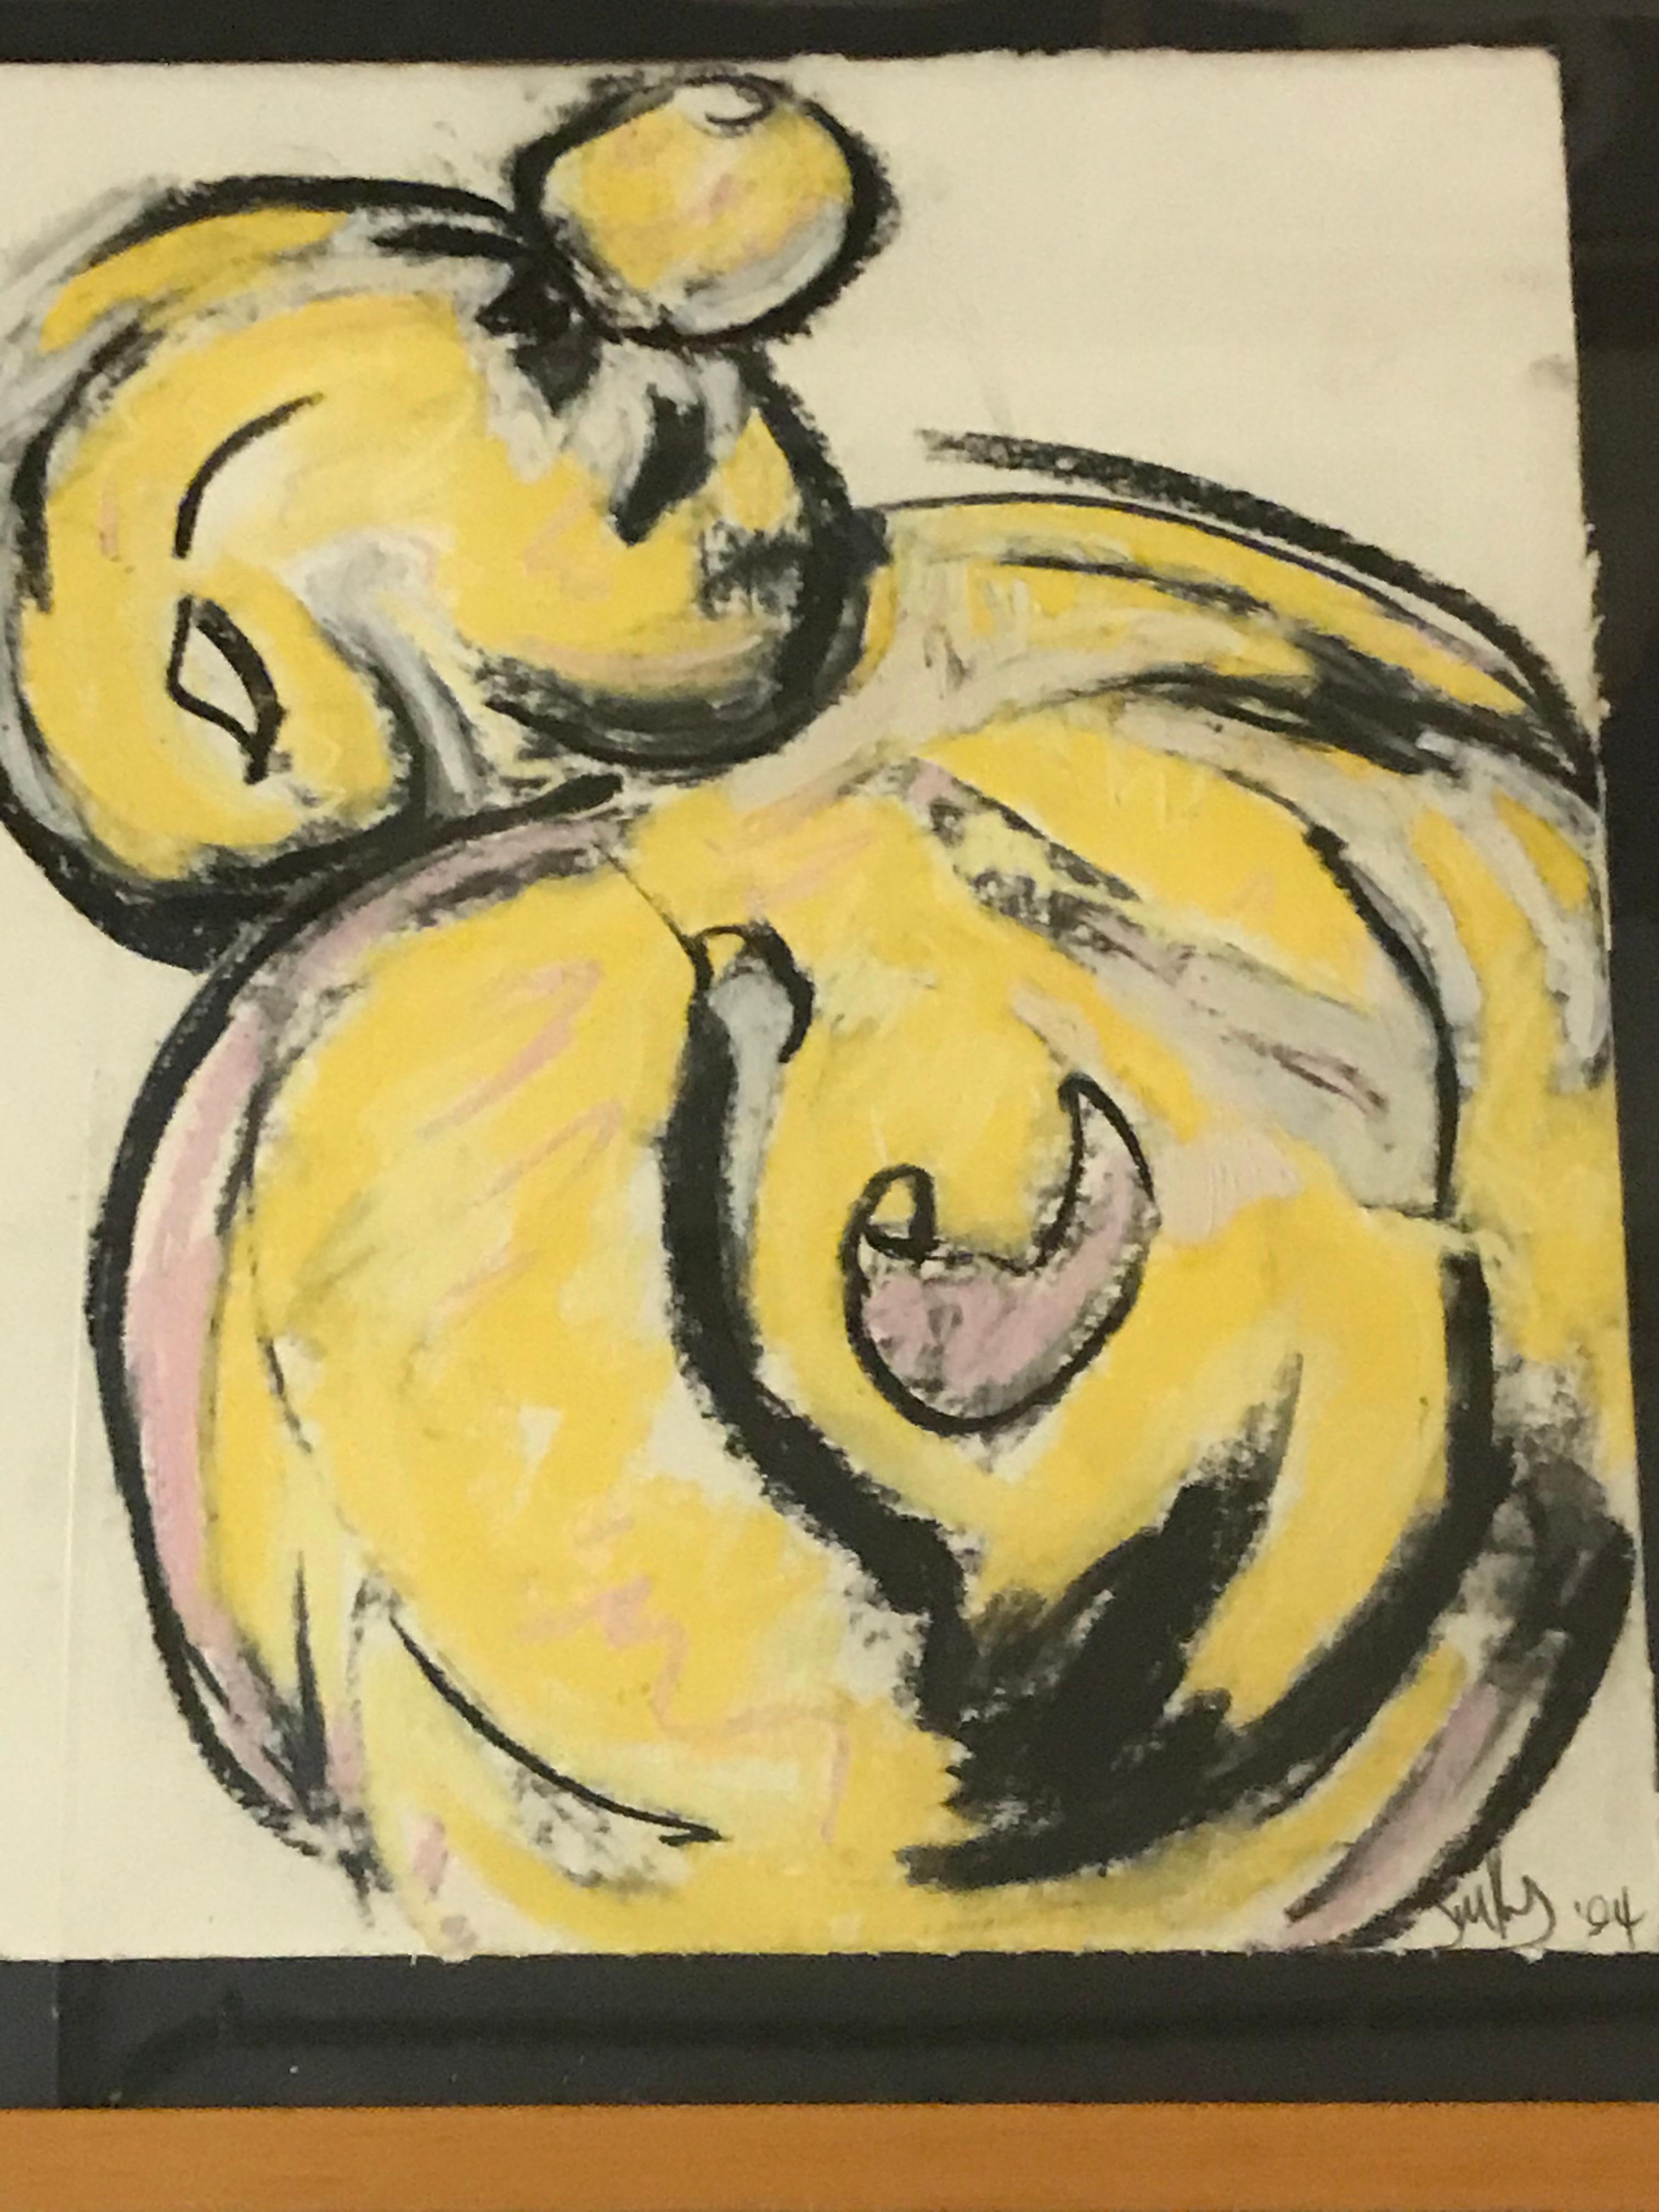 This artwork is signed by Jim Kras, and dated 1994.
The artist used oil pastels to feature a yellow crying character sketched with curvy long black lines.
 